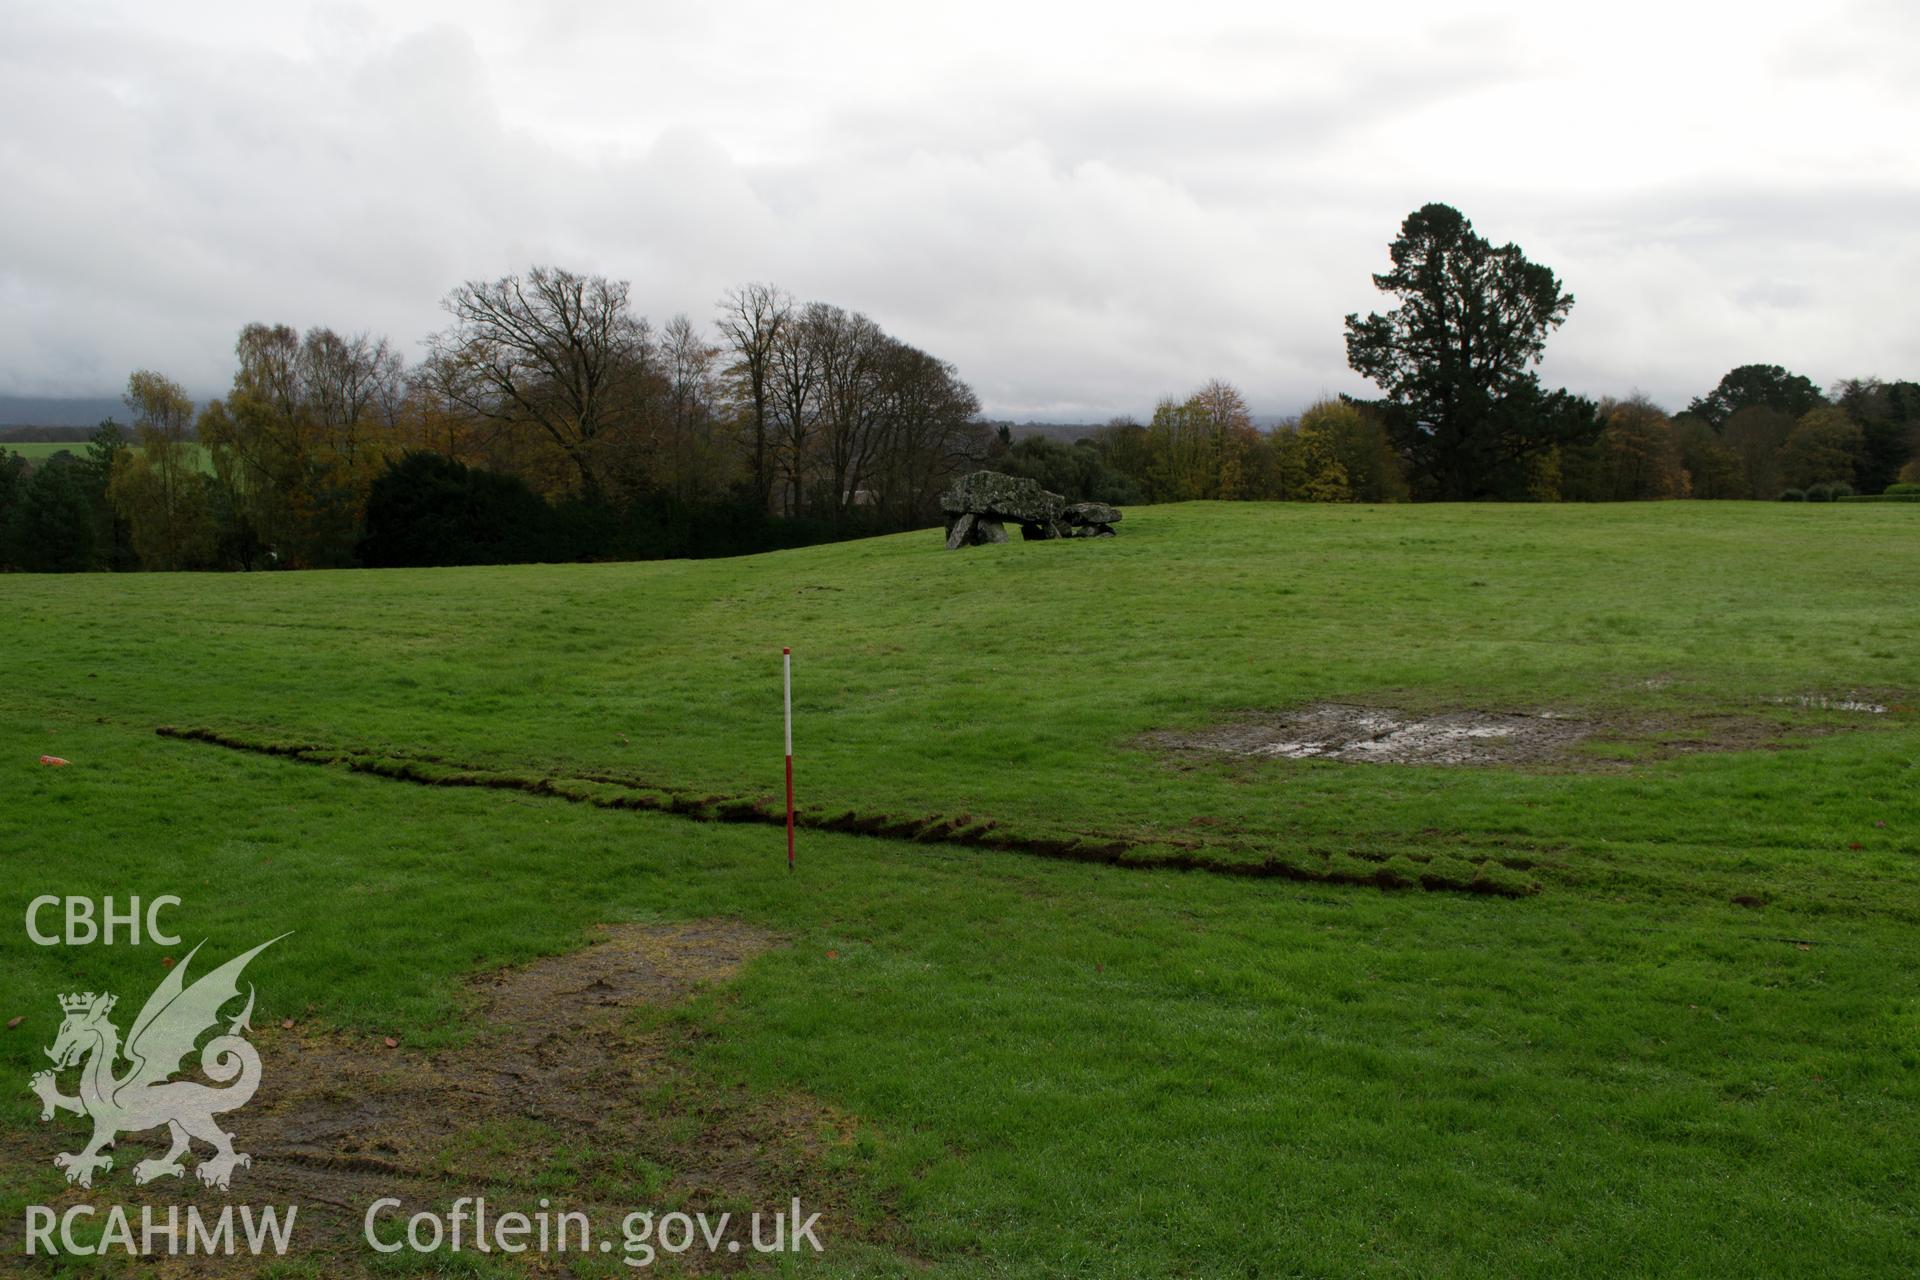 View from north west of 10m long wider trench, showing relationship with burial chamber. Photographed during archaeological watching brief of Plas Newydd, Ynys Mon, conducted by Gwynedd Archaeological Trust on 14th November 2017. Project no. 2542.